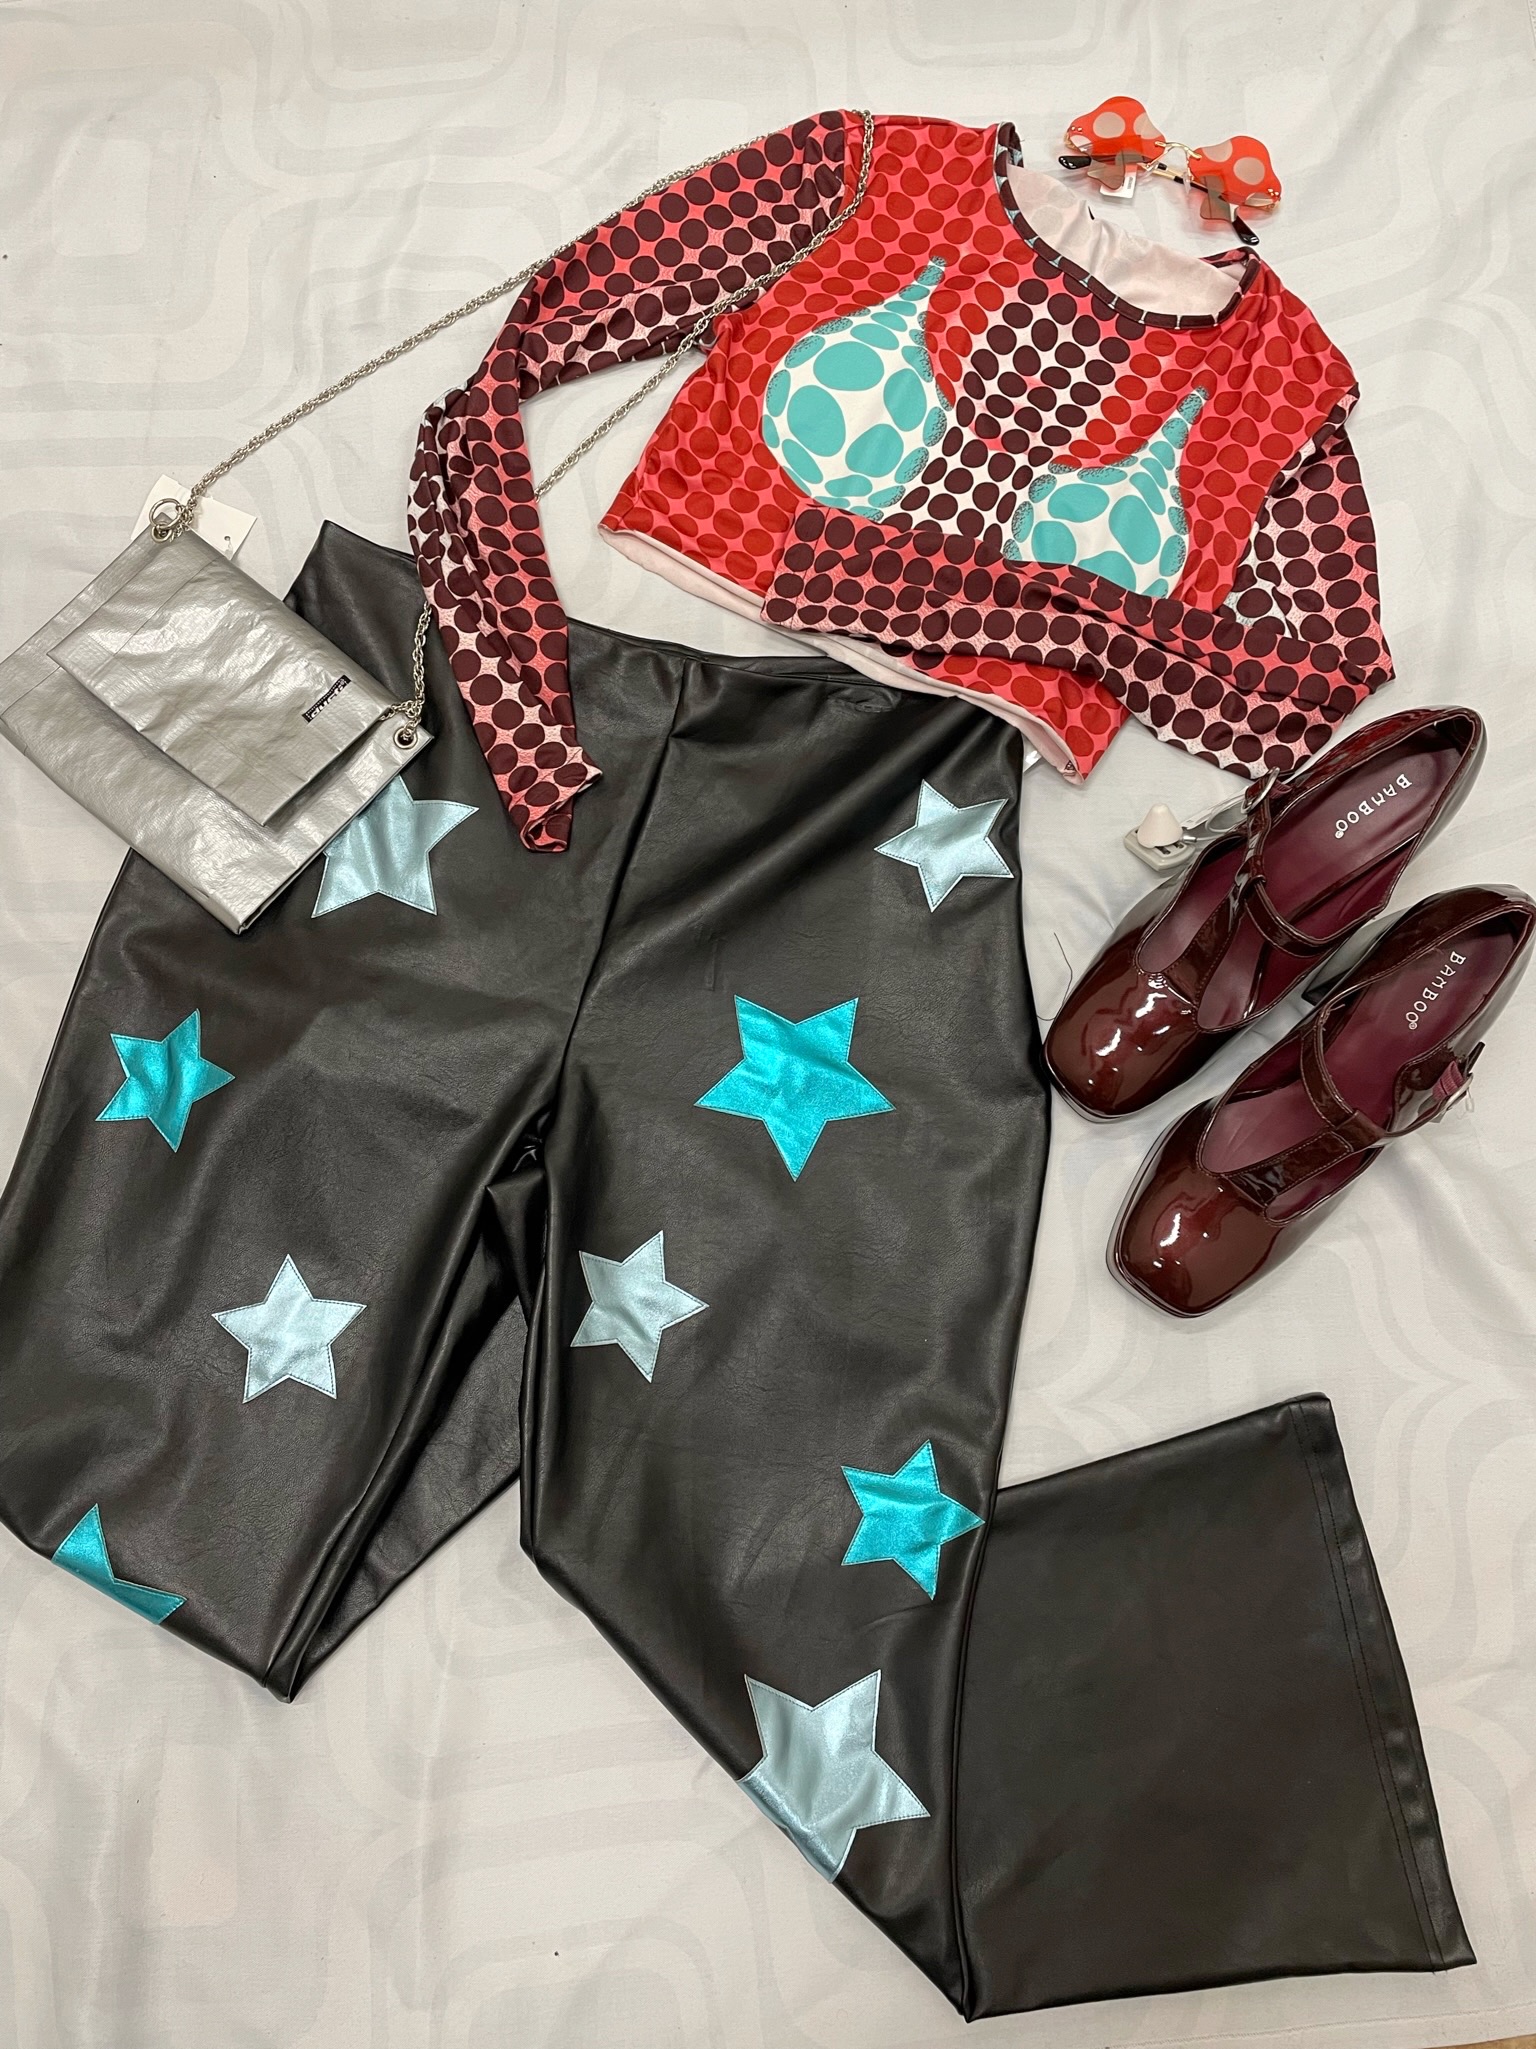 Flat lay of a women's outfit featuring black leather pants with metallic star details, mesh red and blue long sleeve top, red shoes, mushroom sunglasses and a silver chain purse